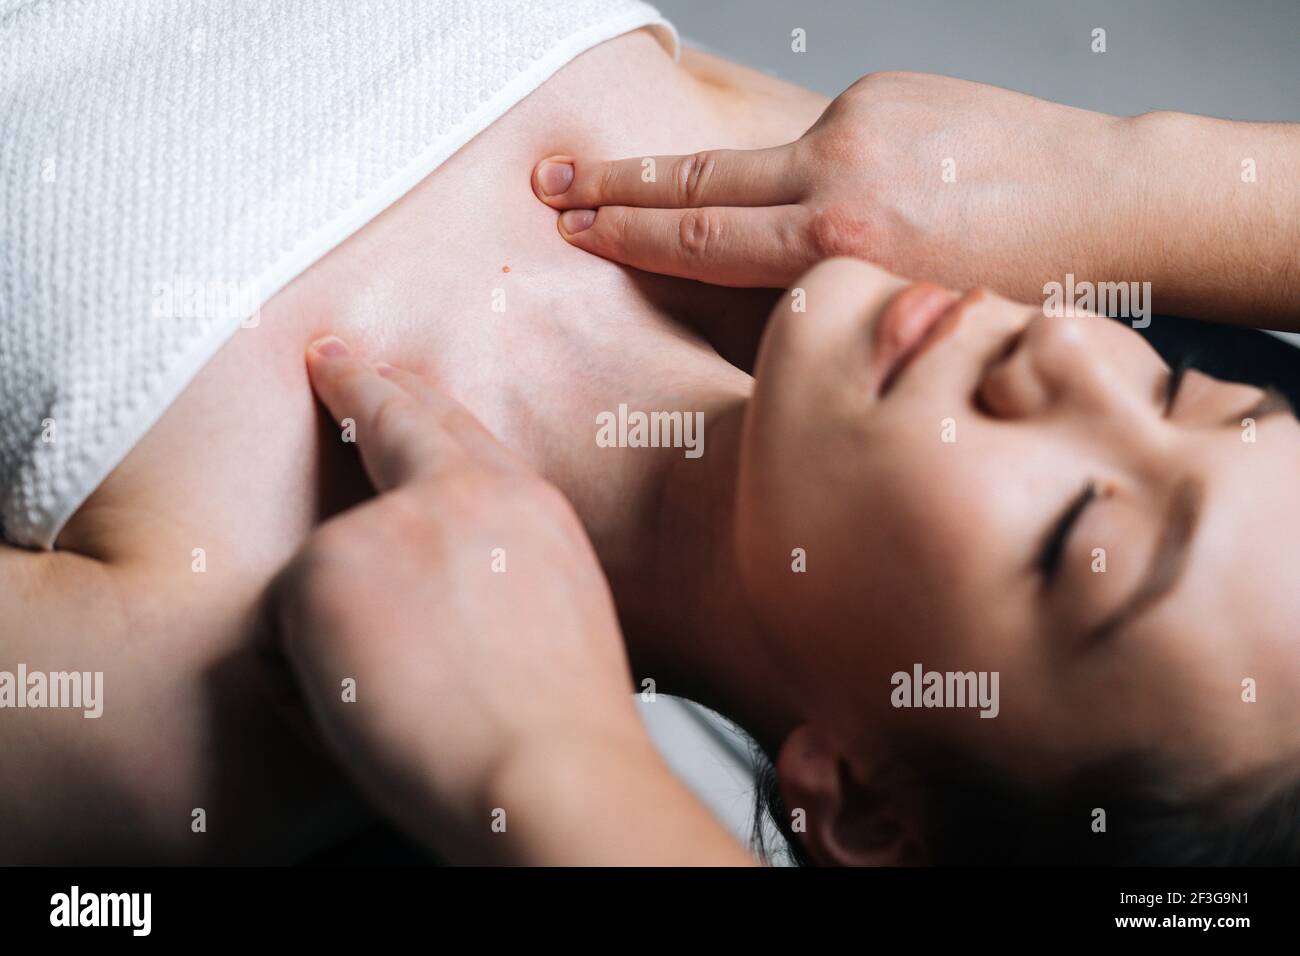 Close-up top view of young woman lying down on massage table during shoulder and neck massage Stock Photo